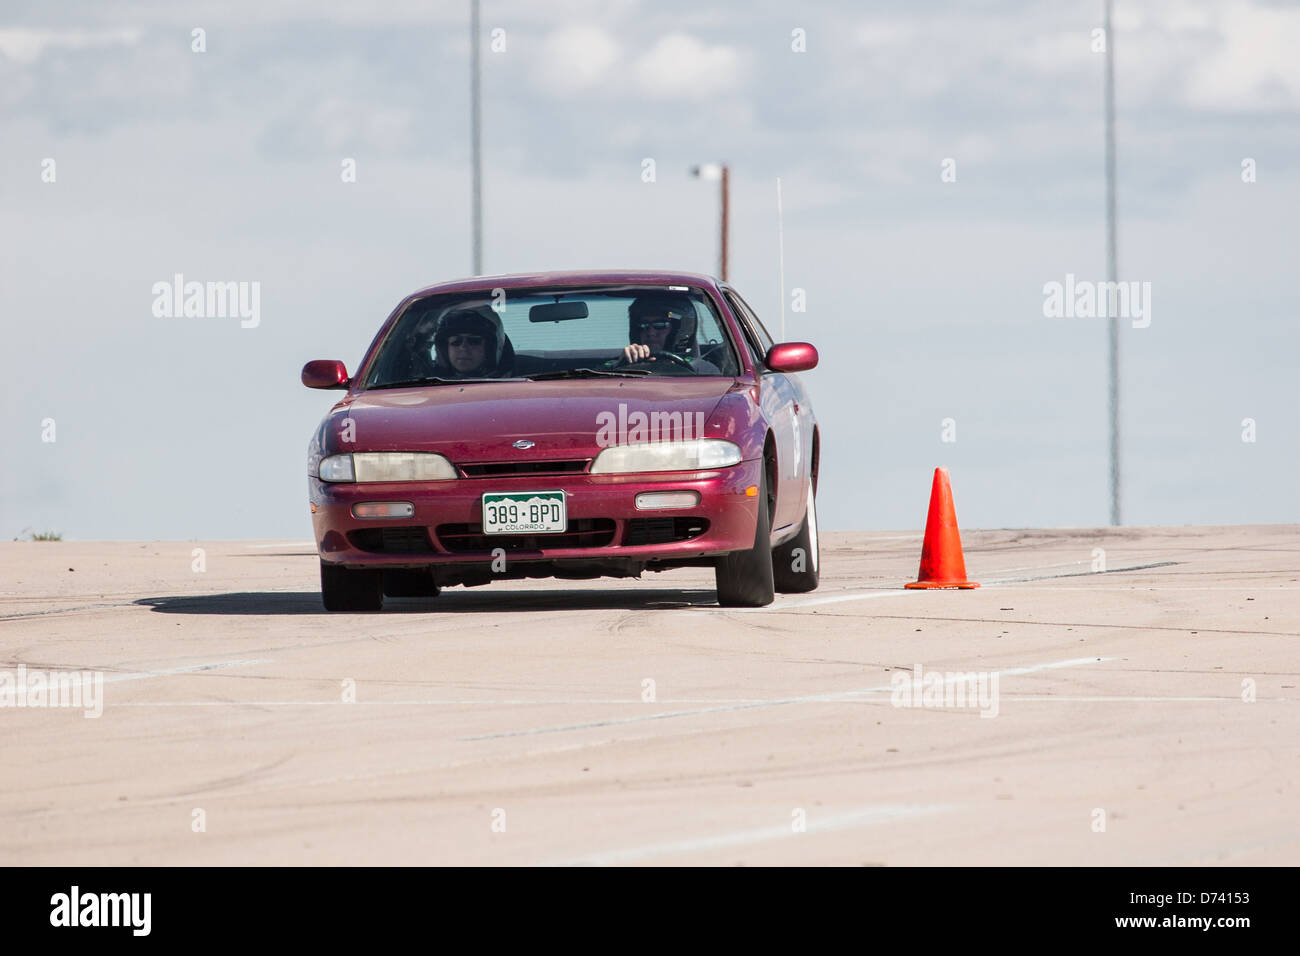 A 1995 Burgundy Nissan 200sx in an autocross race at a regional Sports Car Club of America (SCCA) event Stock Photo